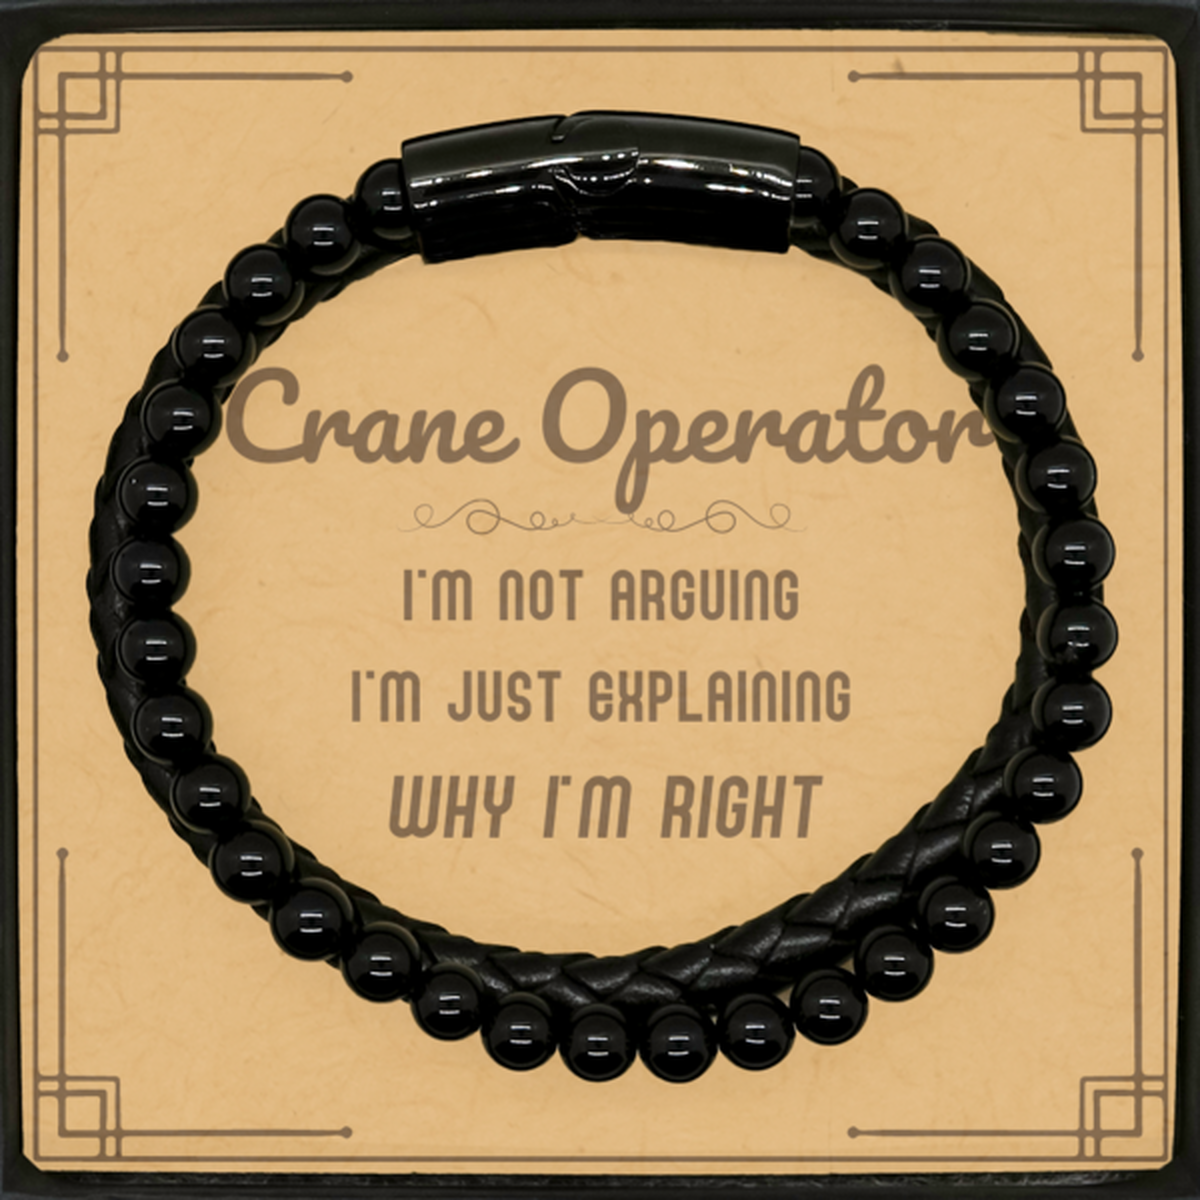 Crane Operator I'm not Arguing. I'm Just Explaining Why I'm RIGHT Stone Leather Bracelets, Funny Saying Quote Crane Operator Gifts For Crane Operator Message Card Graduation Birthday Christmas Gifts for Men Women Coworker